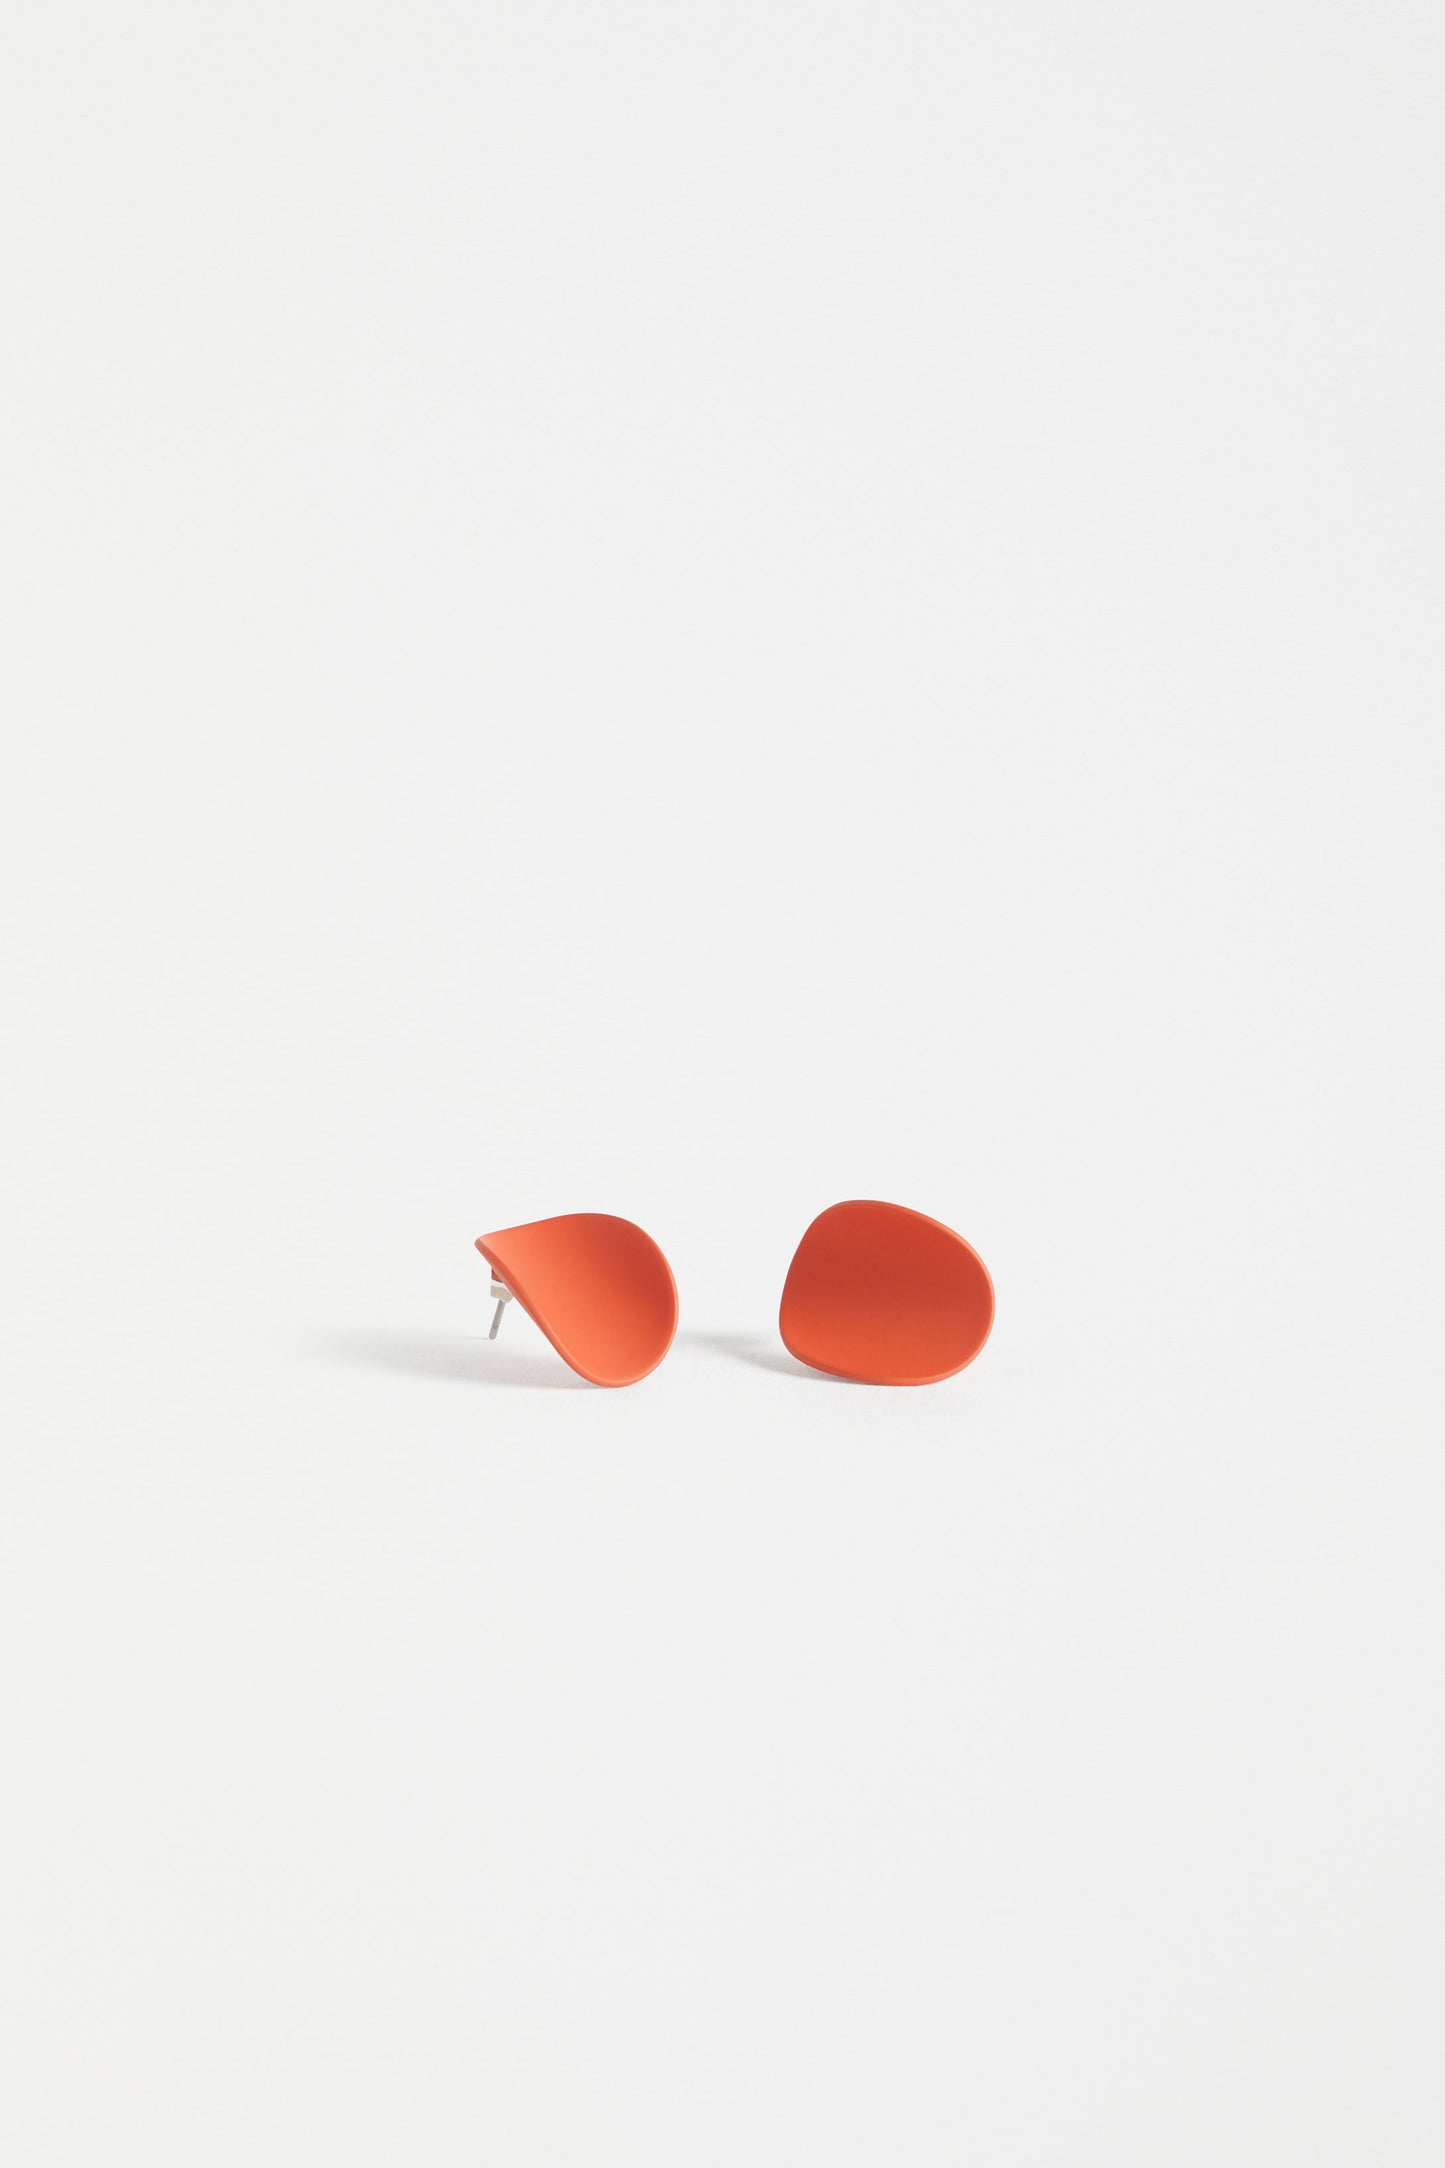 Kave Concave Oval Stud Earring | FIRE ORANGE